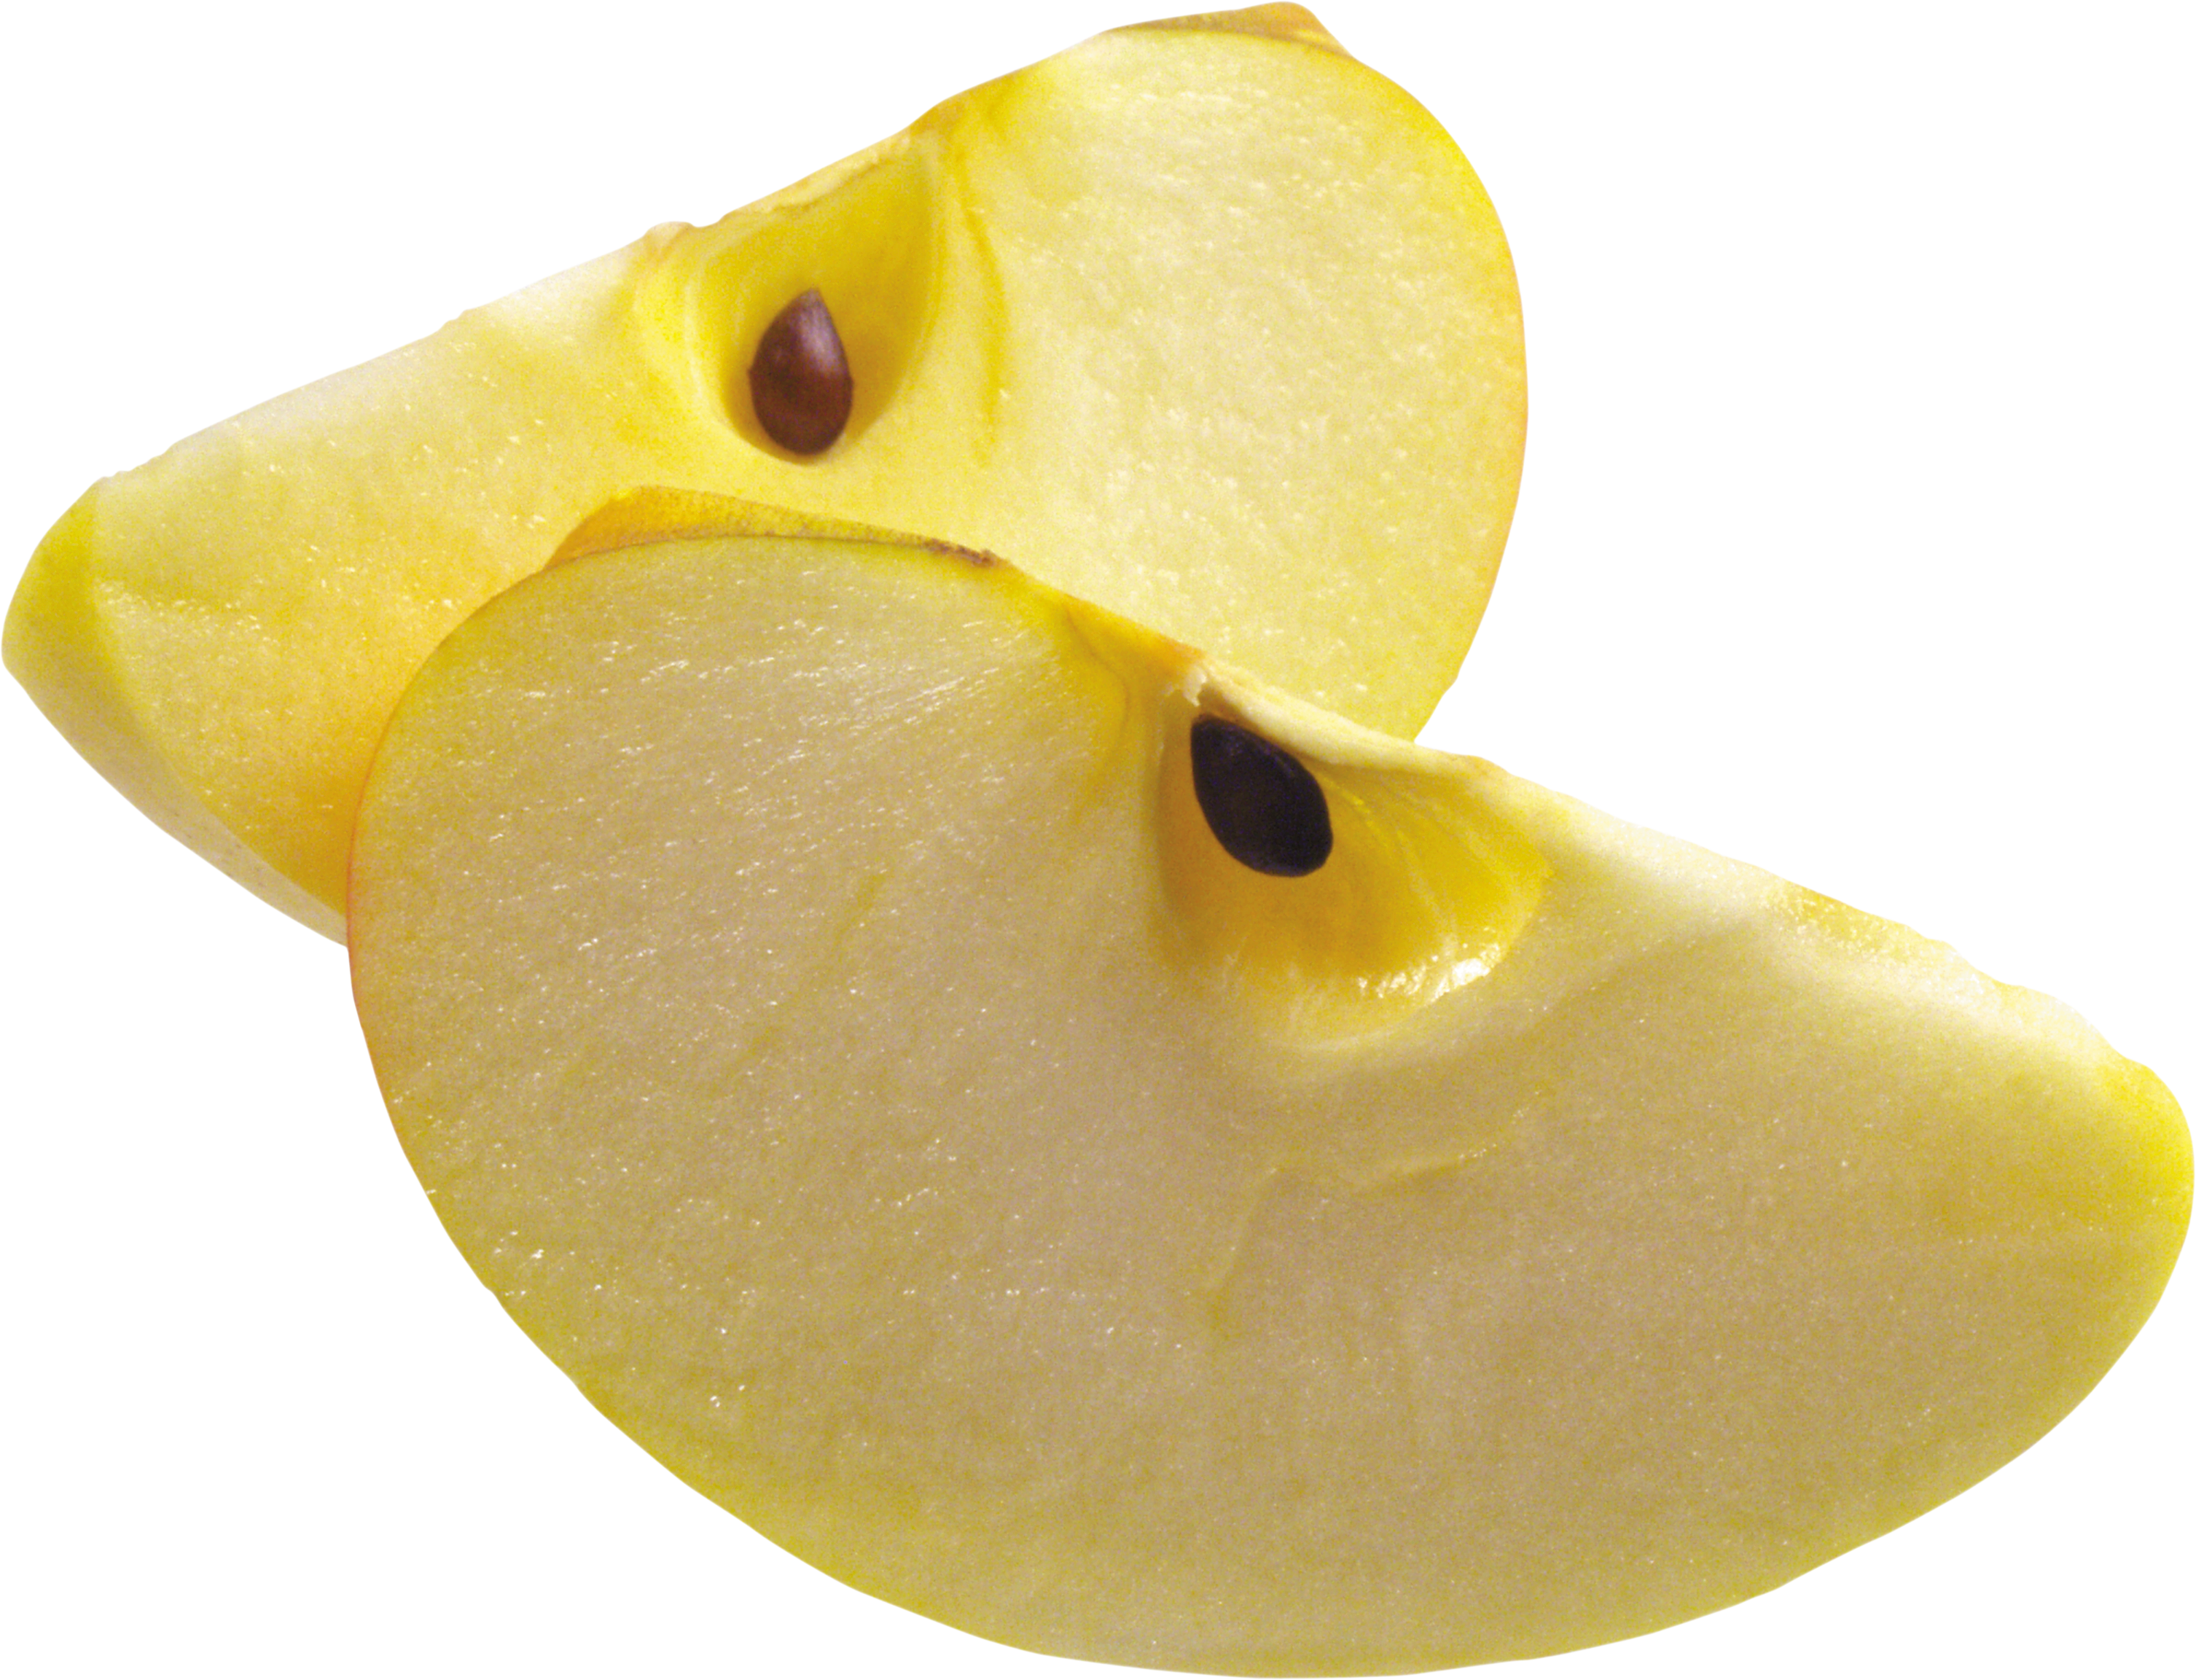 Classic Apple slices PNG Image